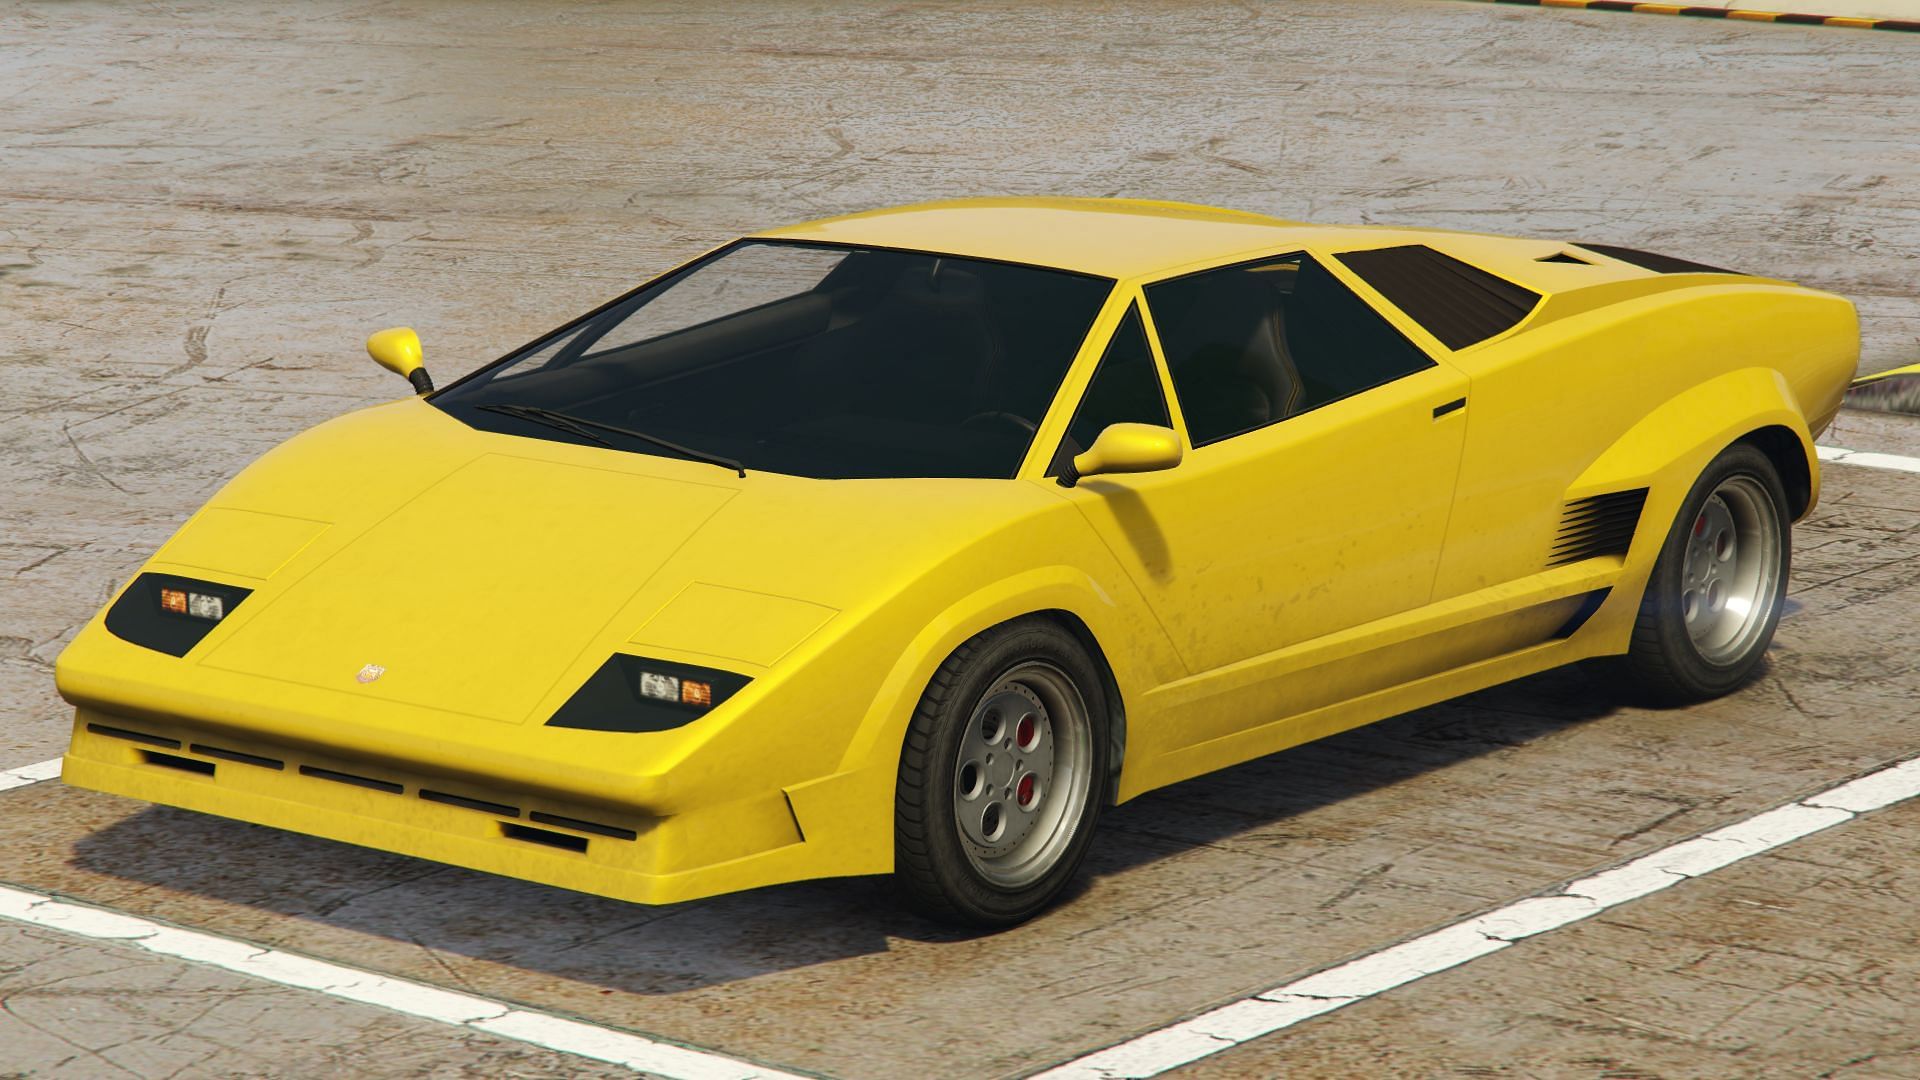 GTA Online players can get this vehicle for free this week (Image via Rockstar Games)